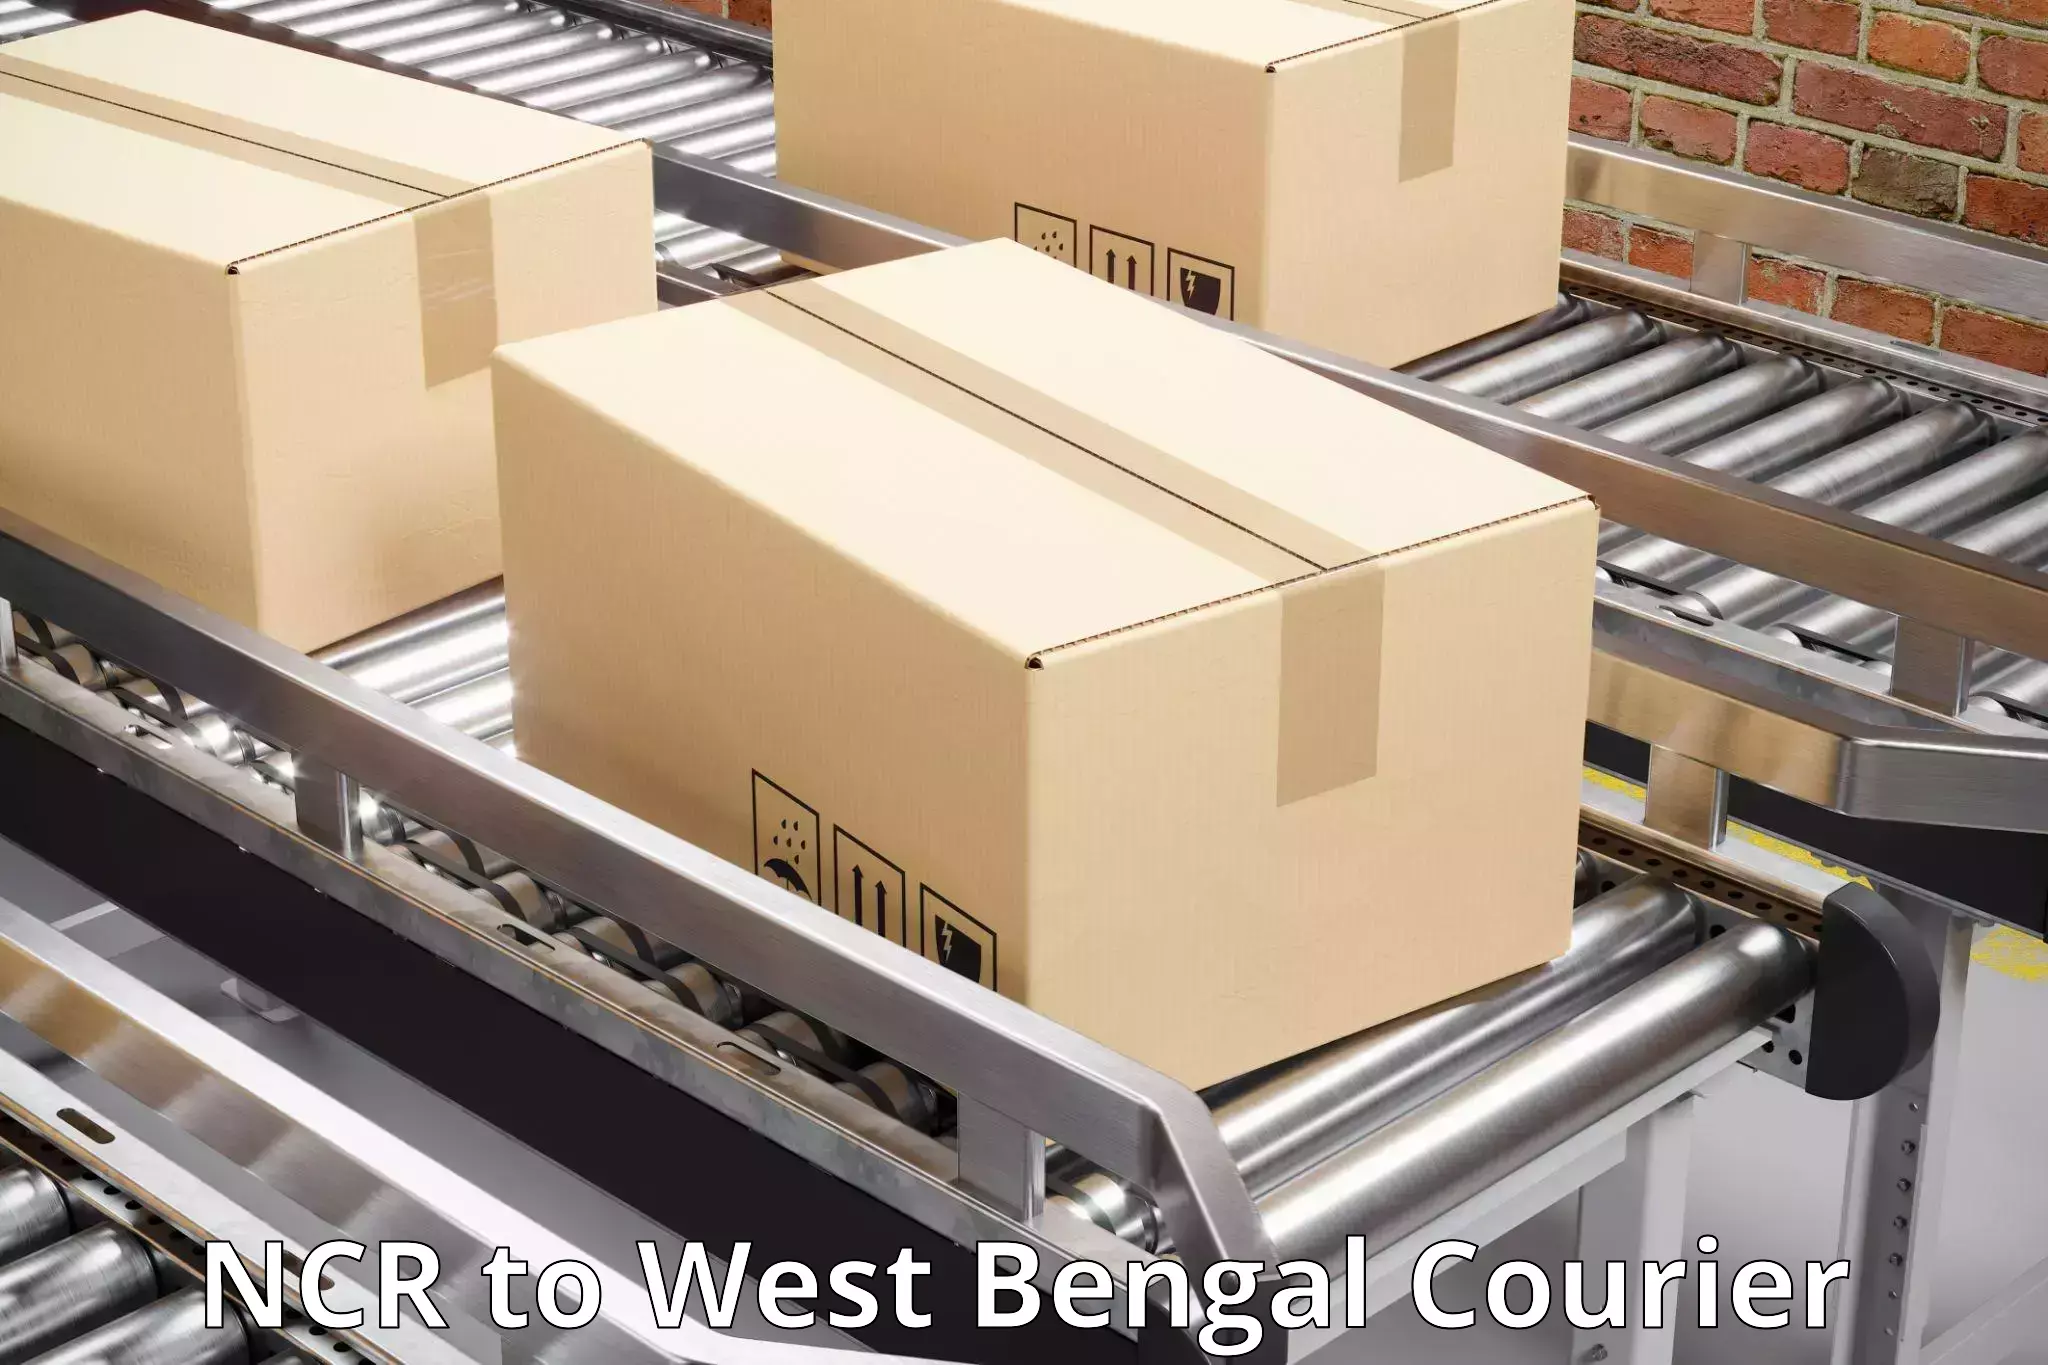 24/7 courier service NCR to Barrackpore